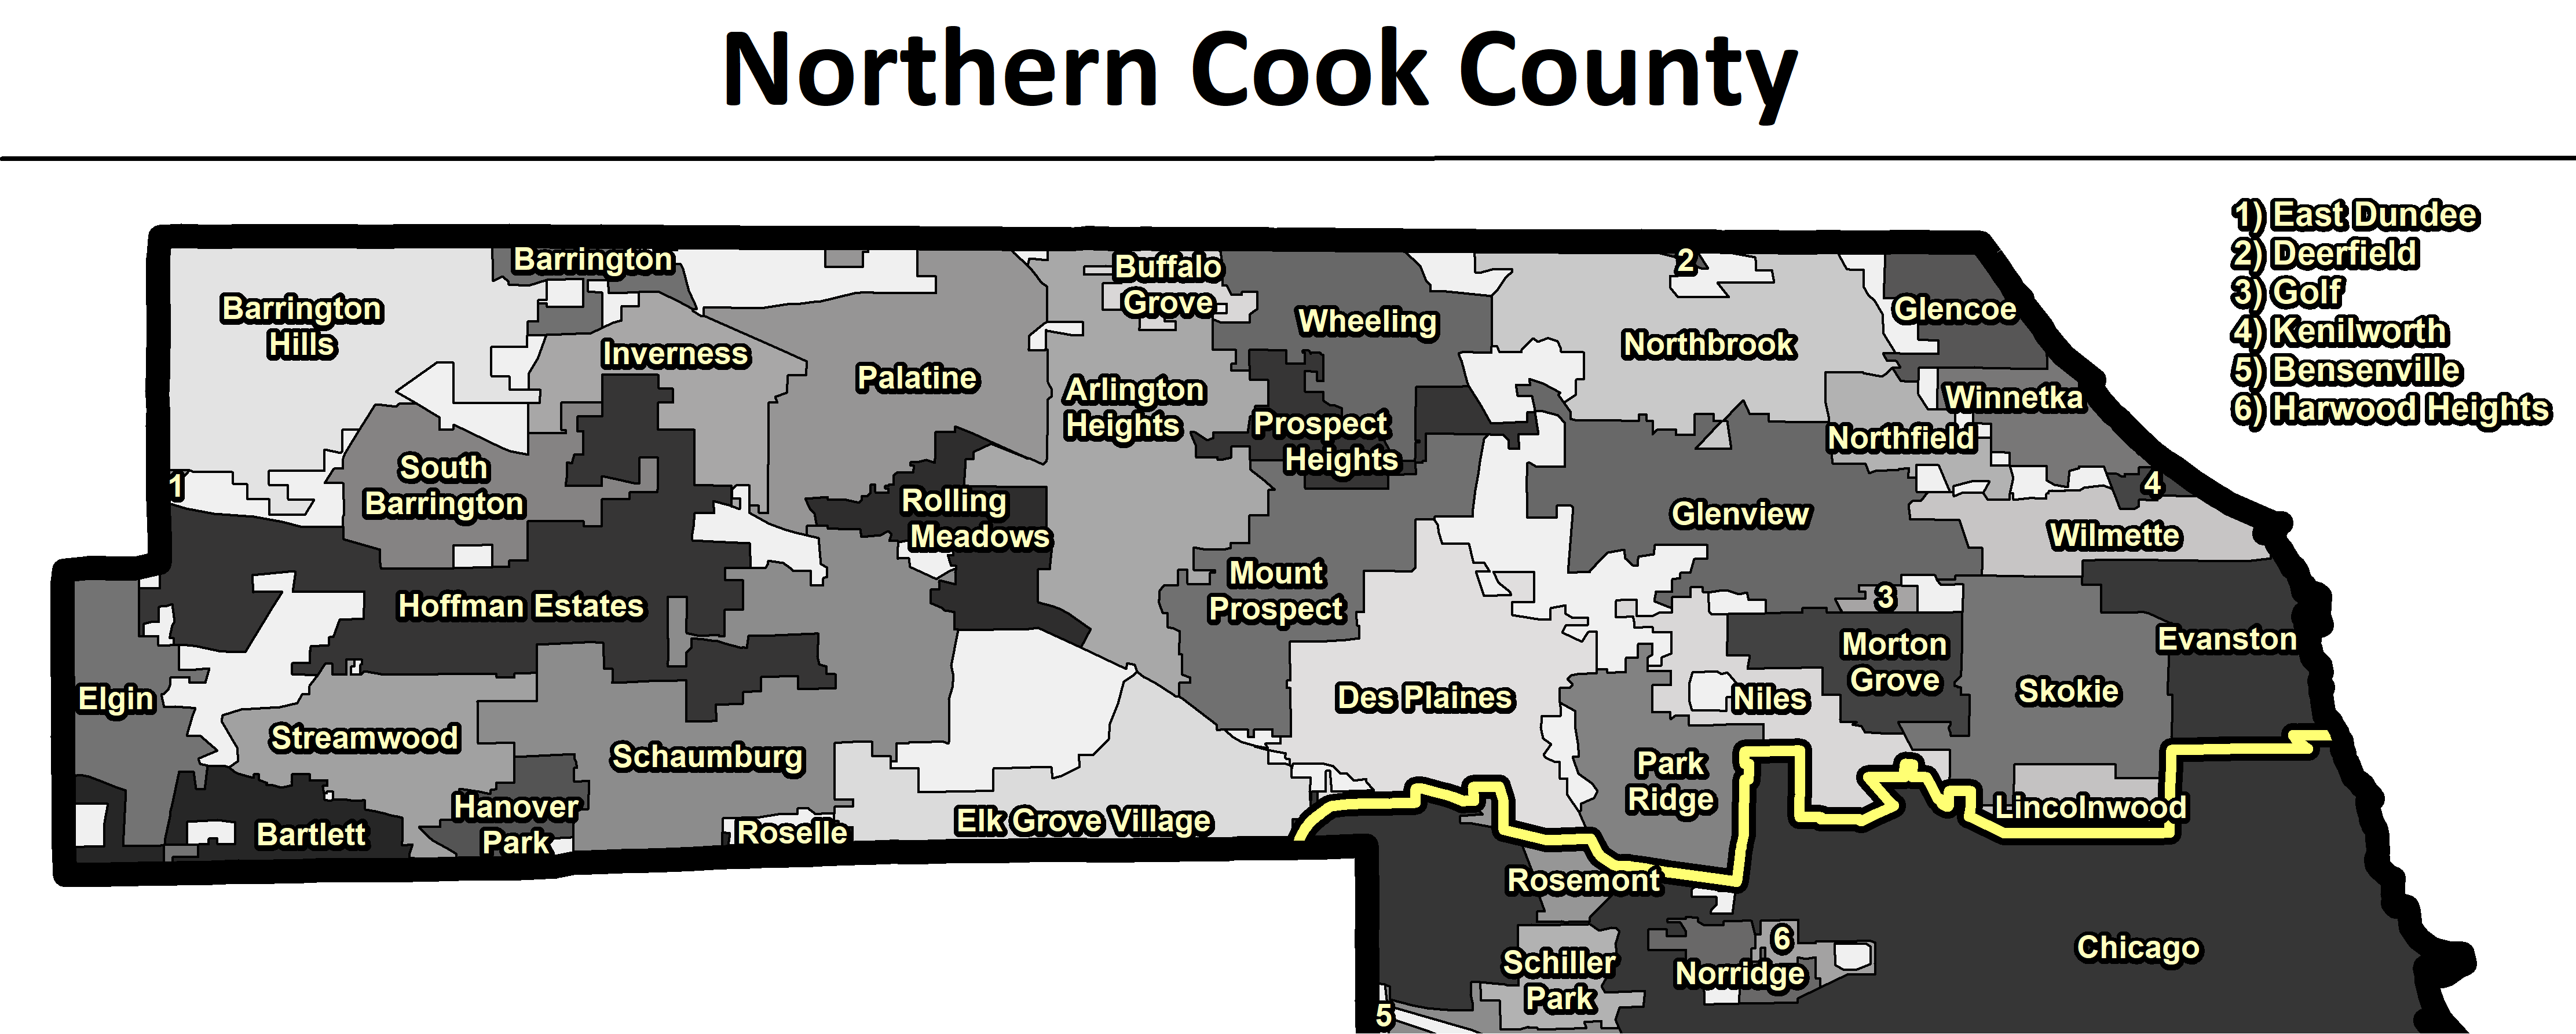 Northern Cook County Forecast Zone